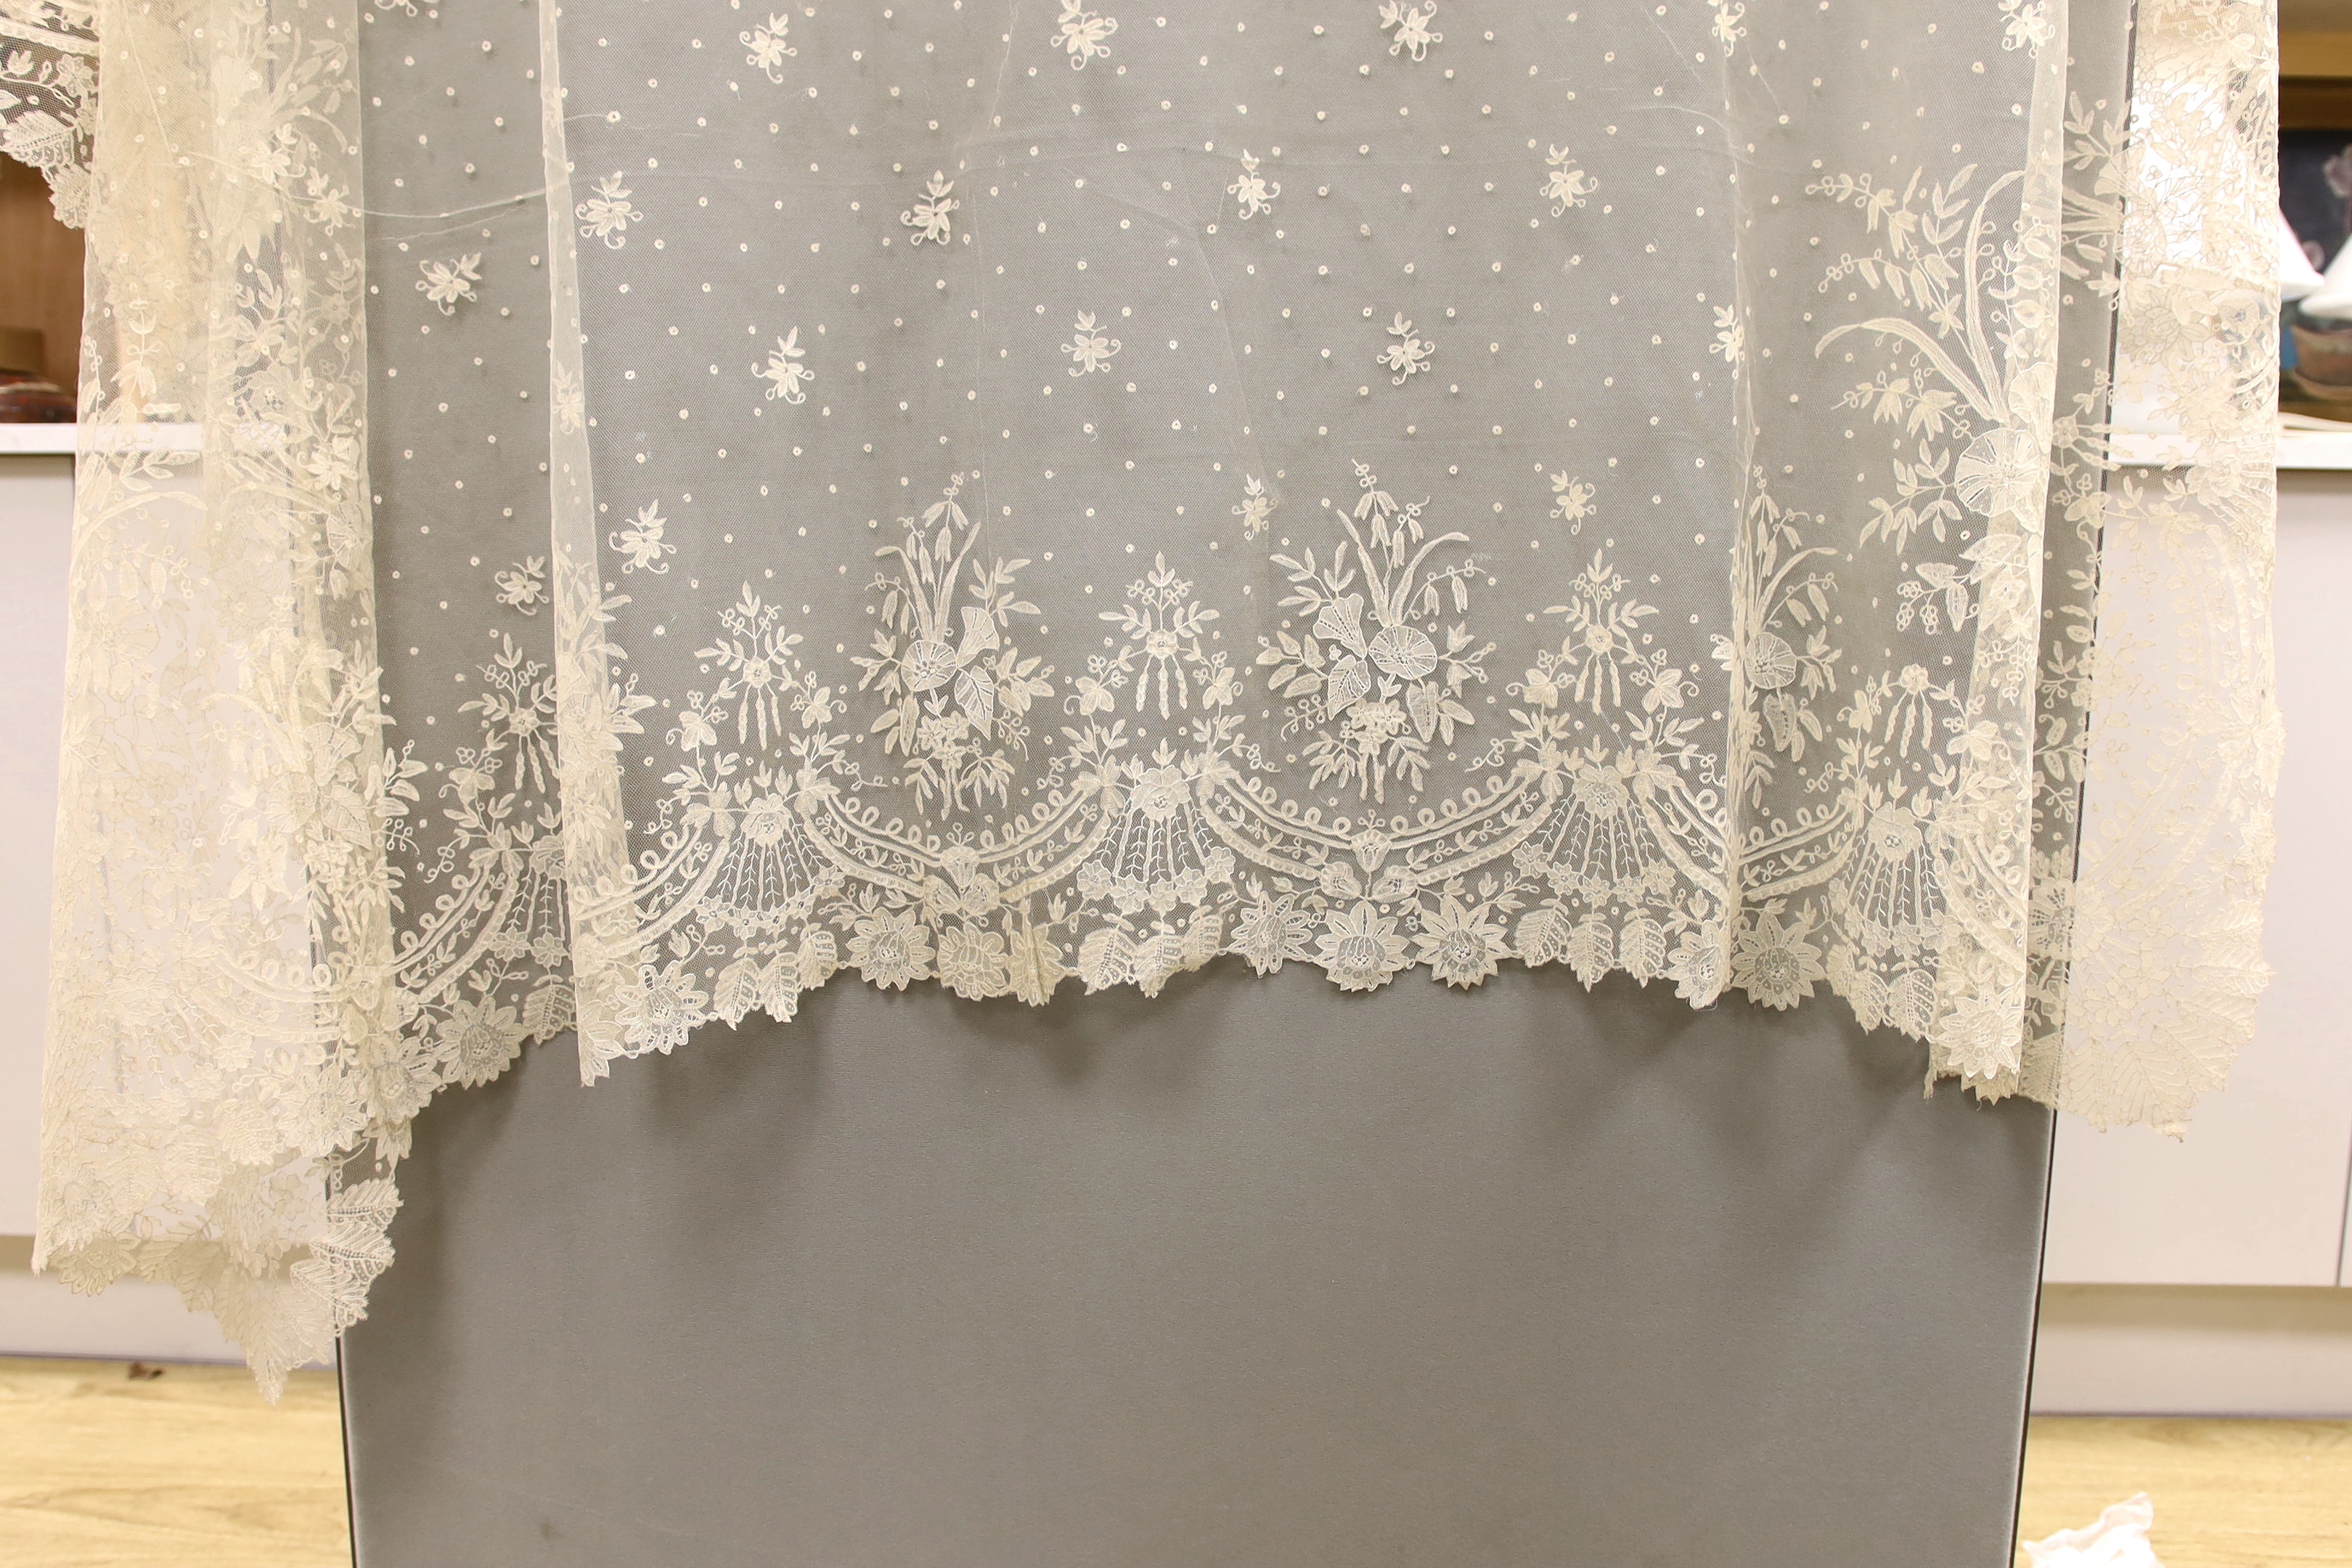 A 19th century Brussels bobbin lace wedding veil with point de gaze needle lace border and insertions, 196cm x 192cm